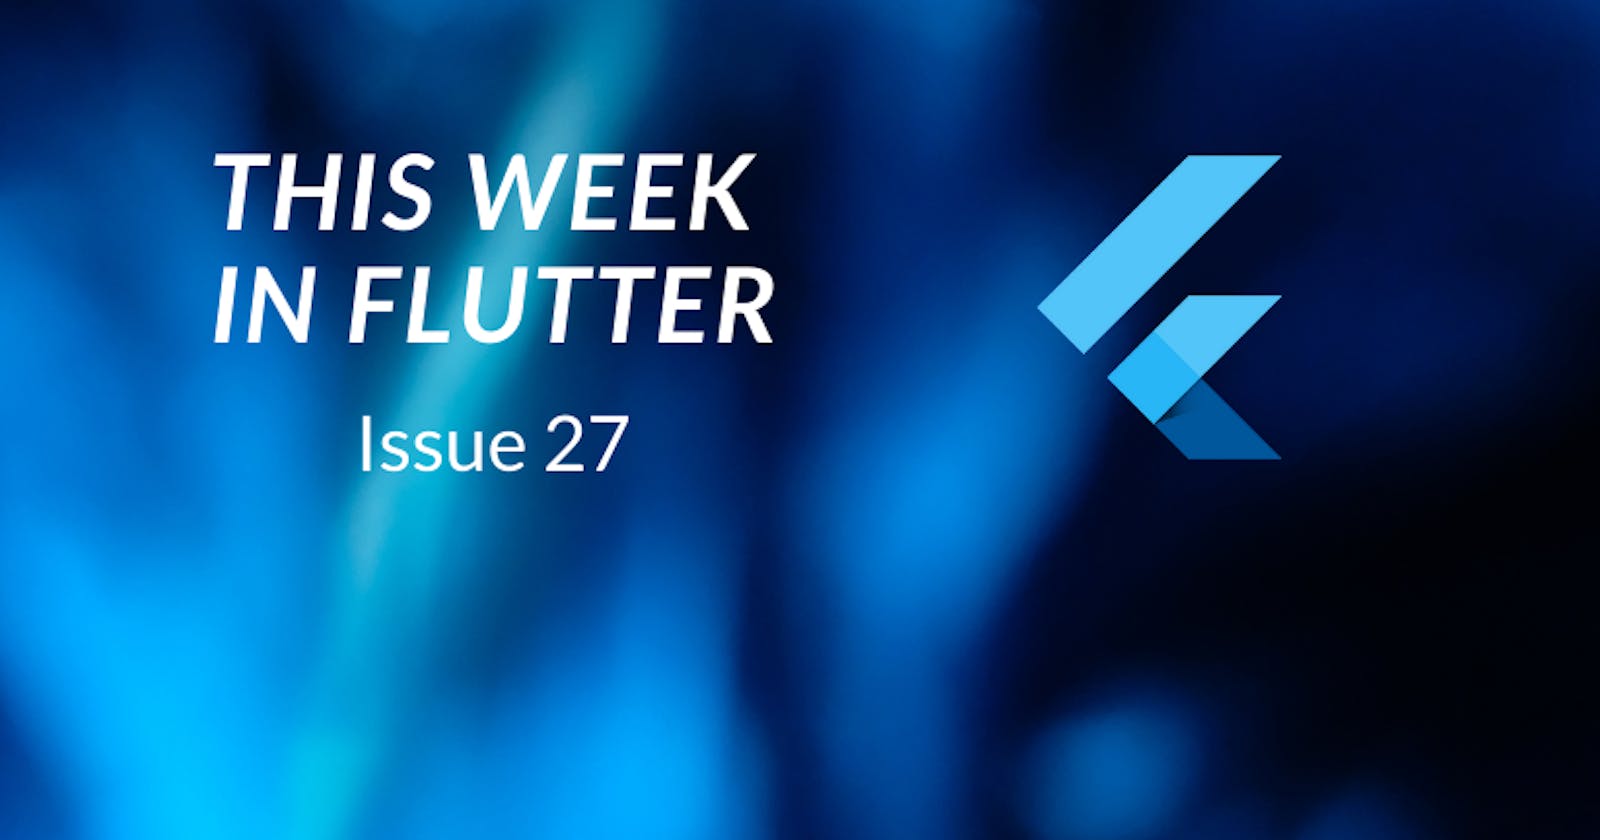 This week in Flutter #27